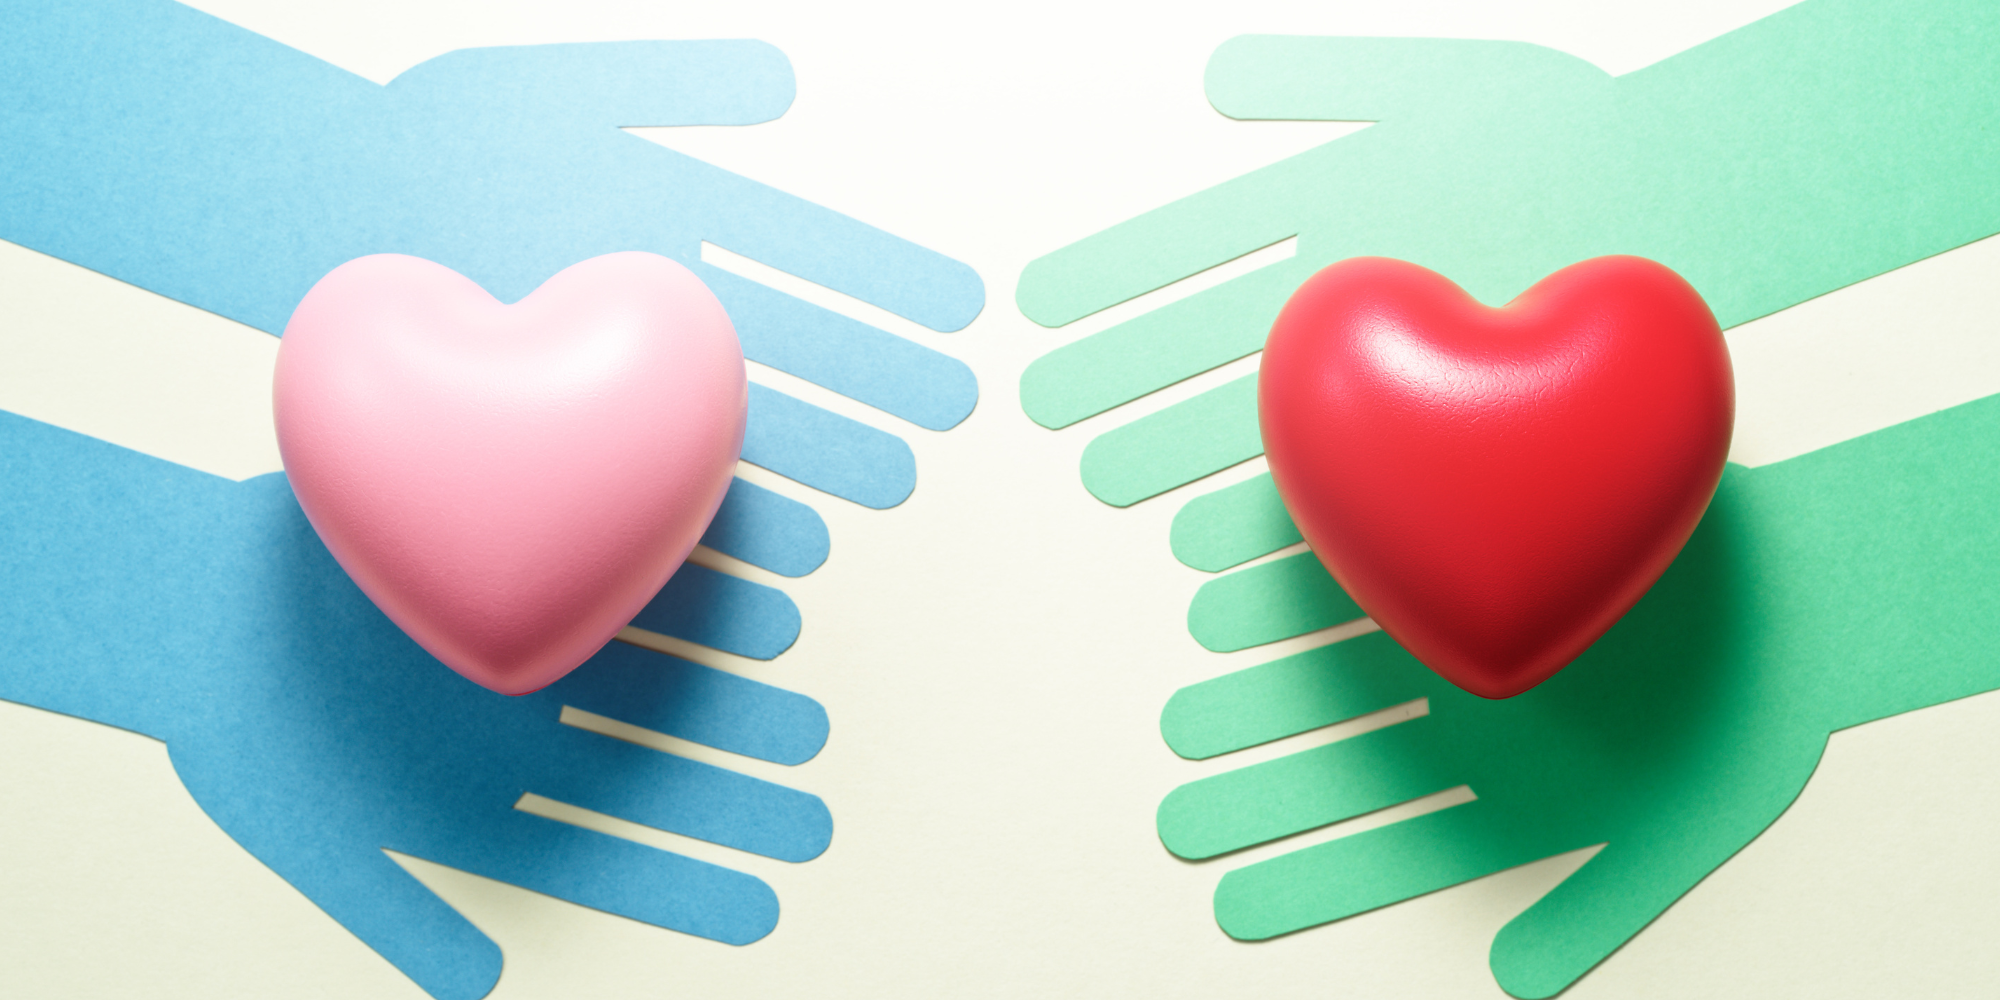 Two pairs of paper cut-out hands (the left pair is blue and the pair on the right is green) extend towards each other from opposite sides of the page. Each is holding a heart..